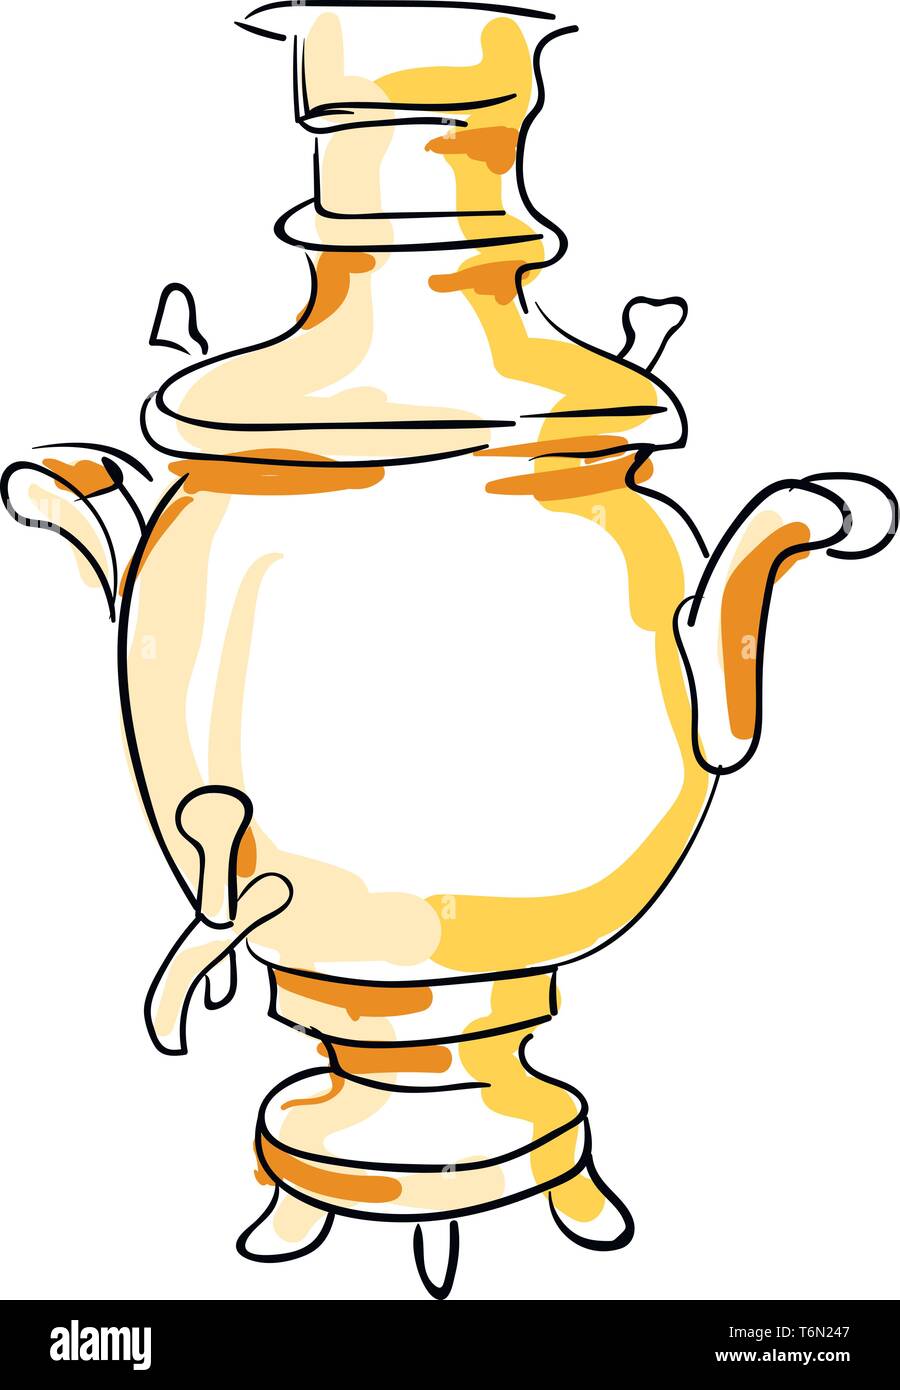 Sketch of a highly decorated tea urn brown in color with a lid  handles  small tap to its front  and equipped with legs for the whole set-up to stand  Stock Vector